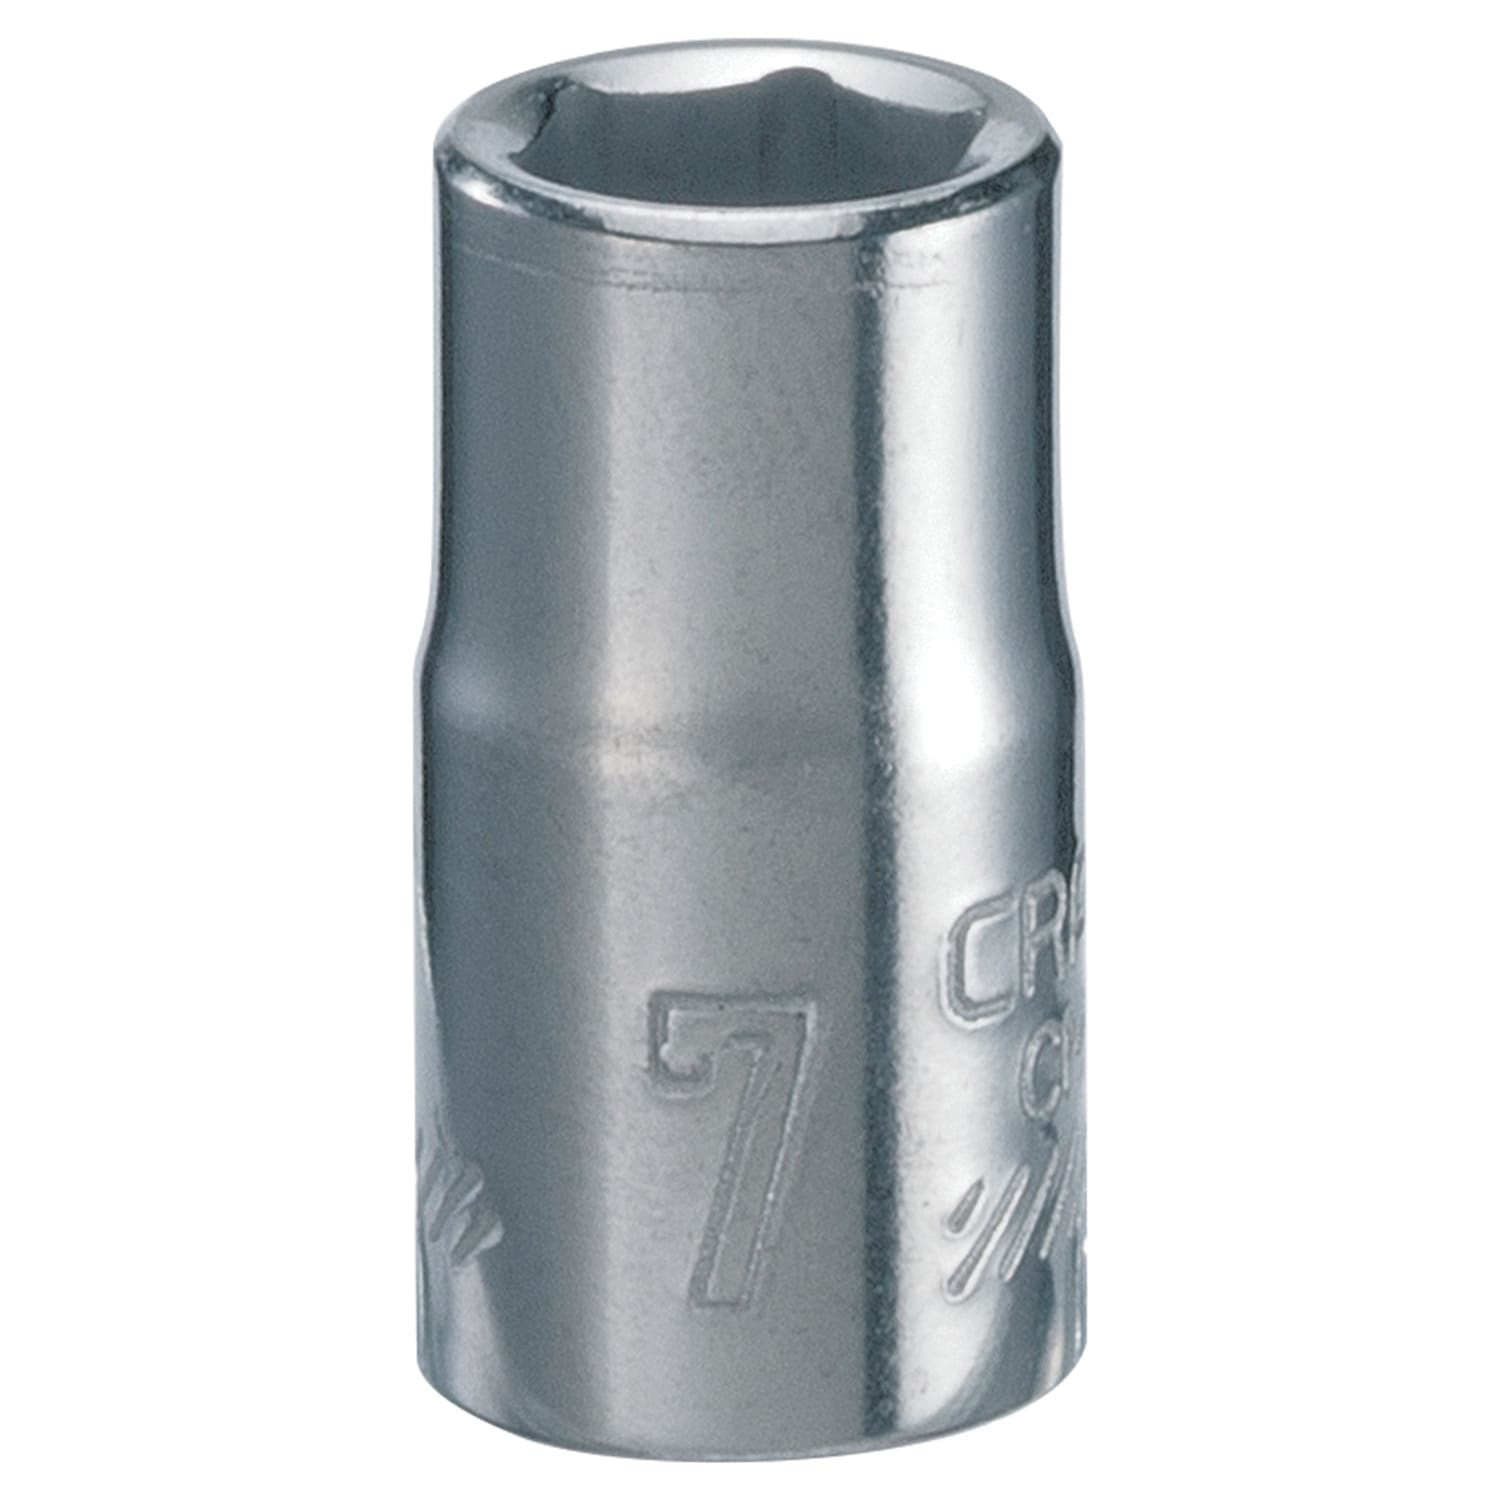 7mm 1/4-Inch Drive 6-Point CRAFTSMAN Shallow Socket Metric CMMT43503 